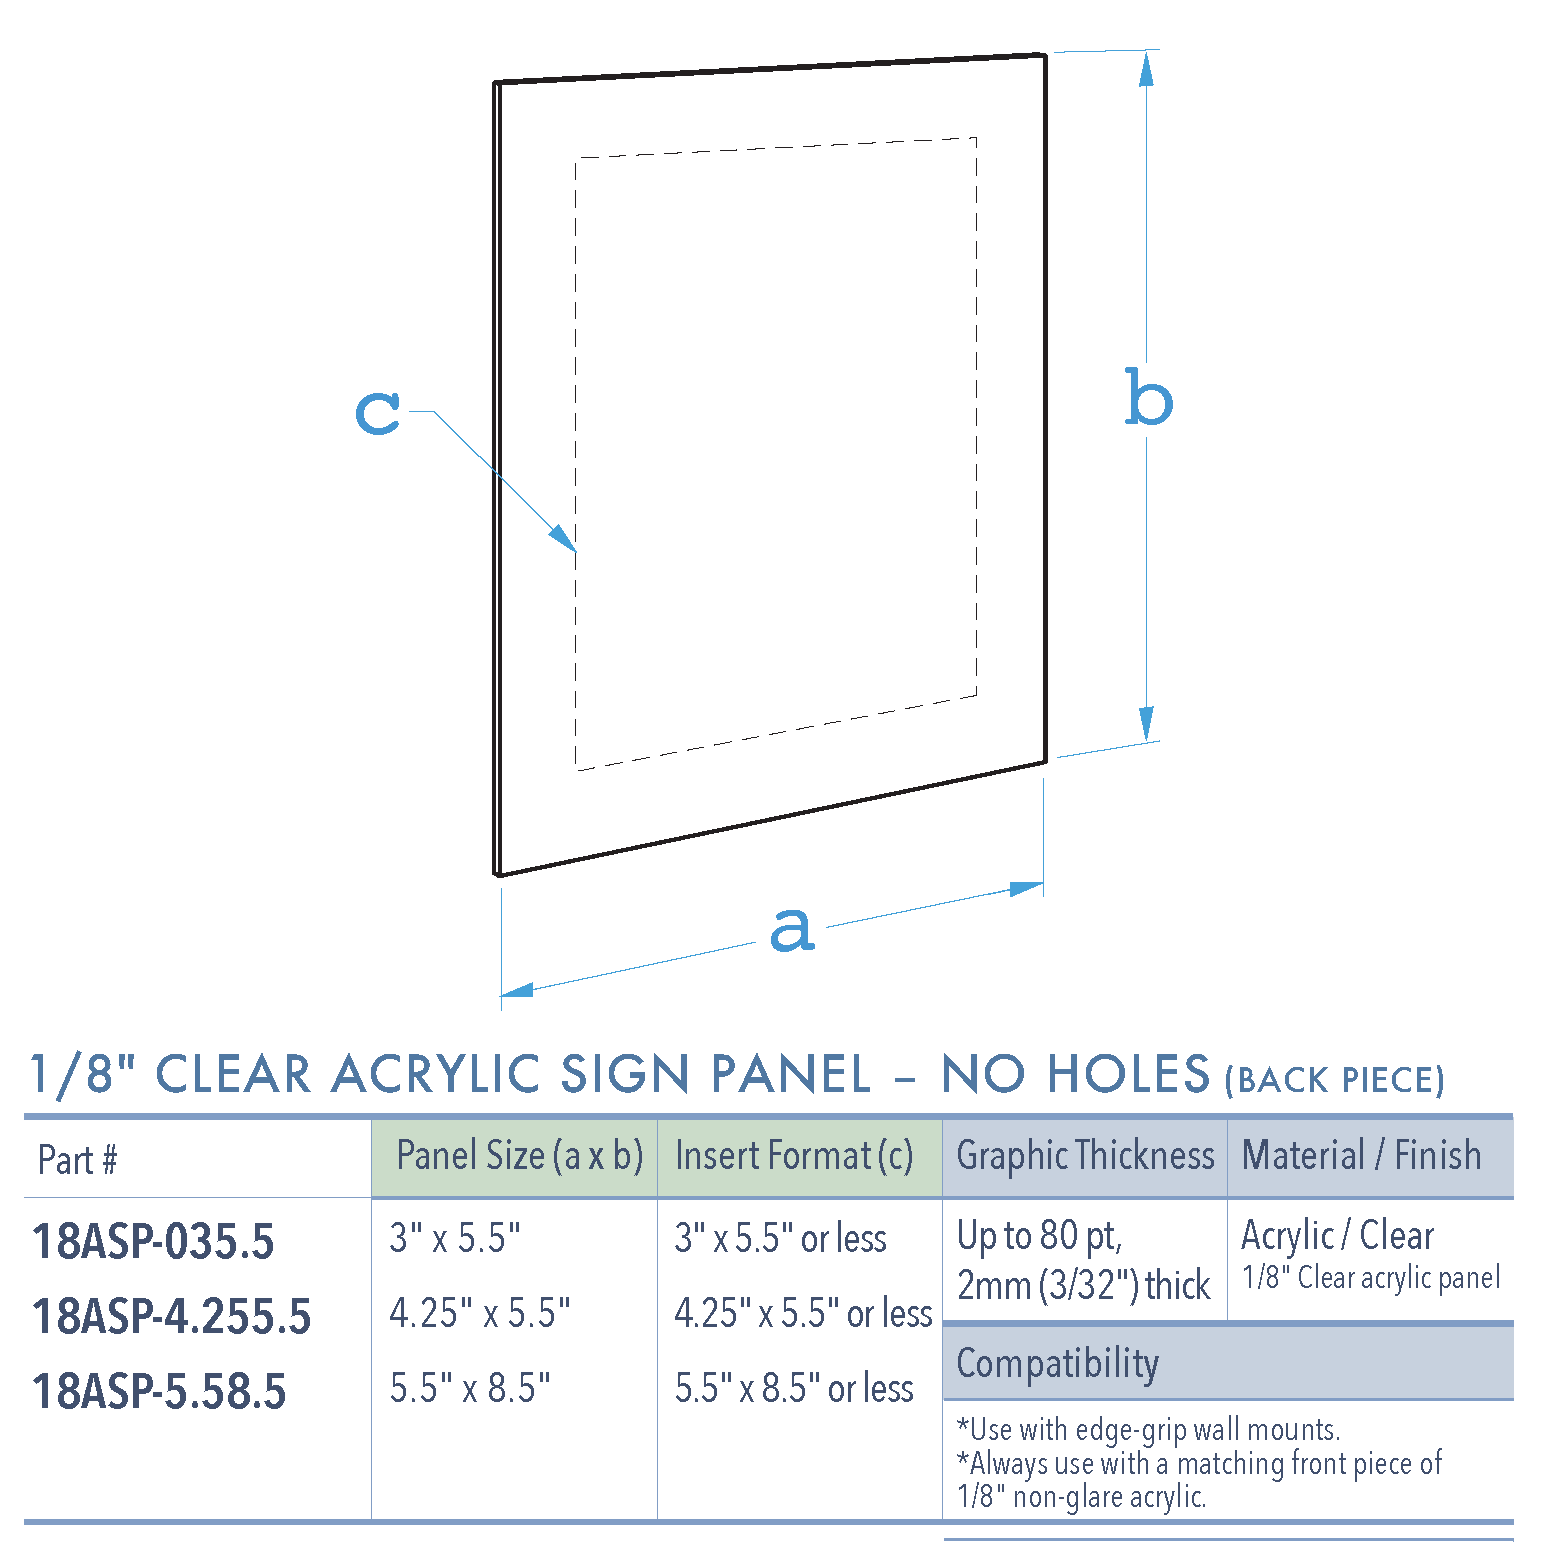 Specifications for 18ASP-PANEL SM